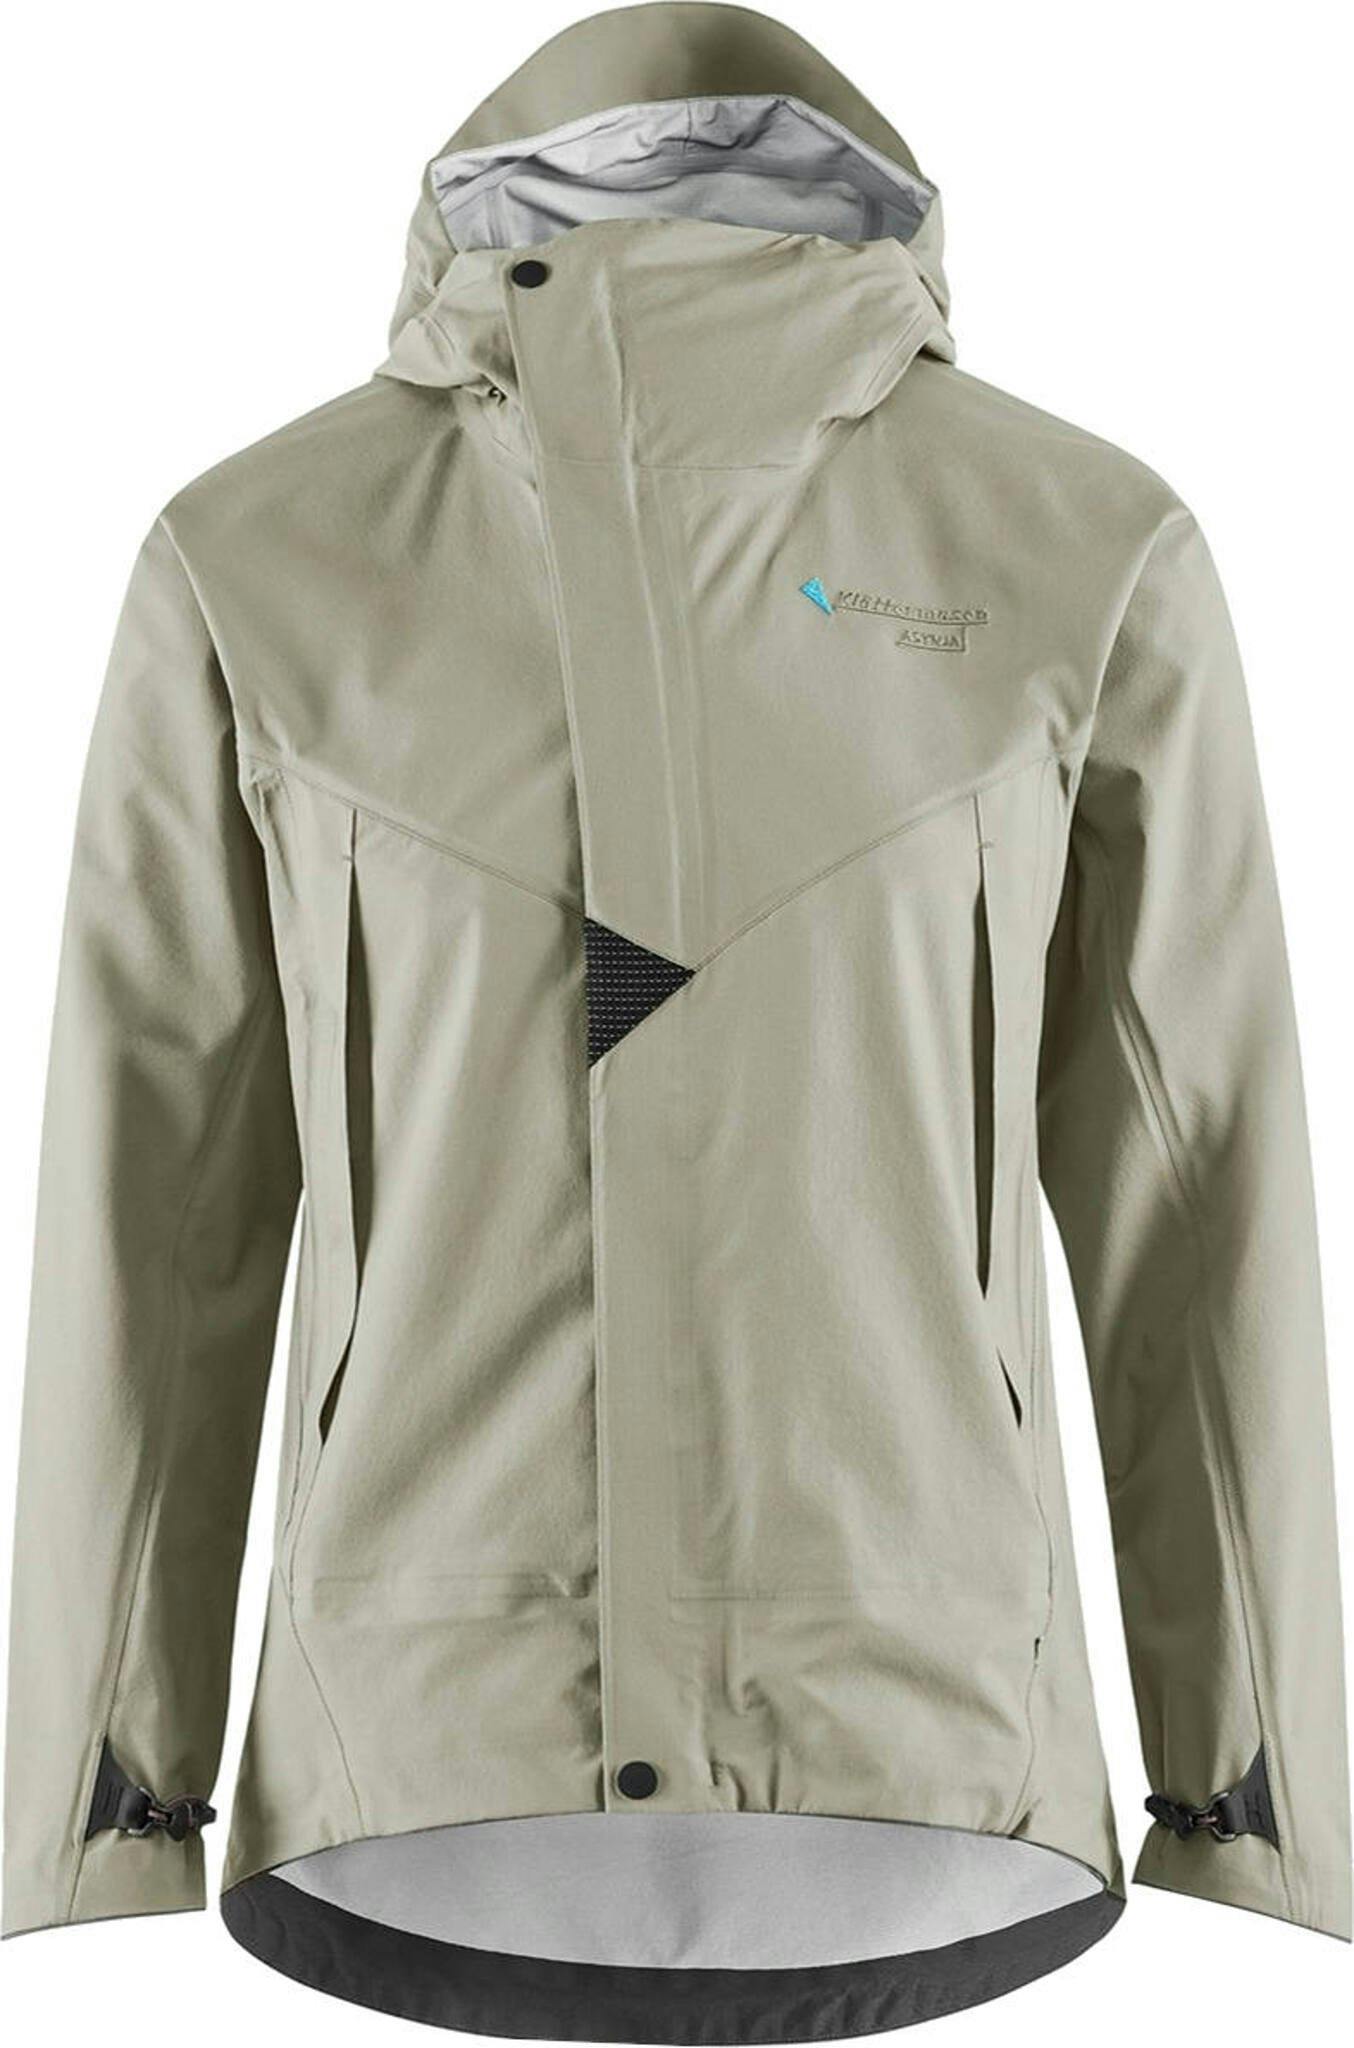 Product image for Asynja Jacket - Women's